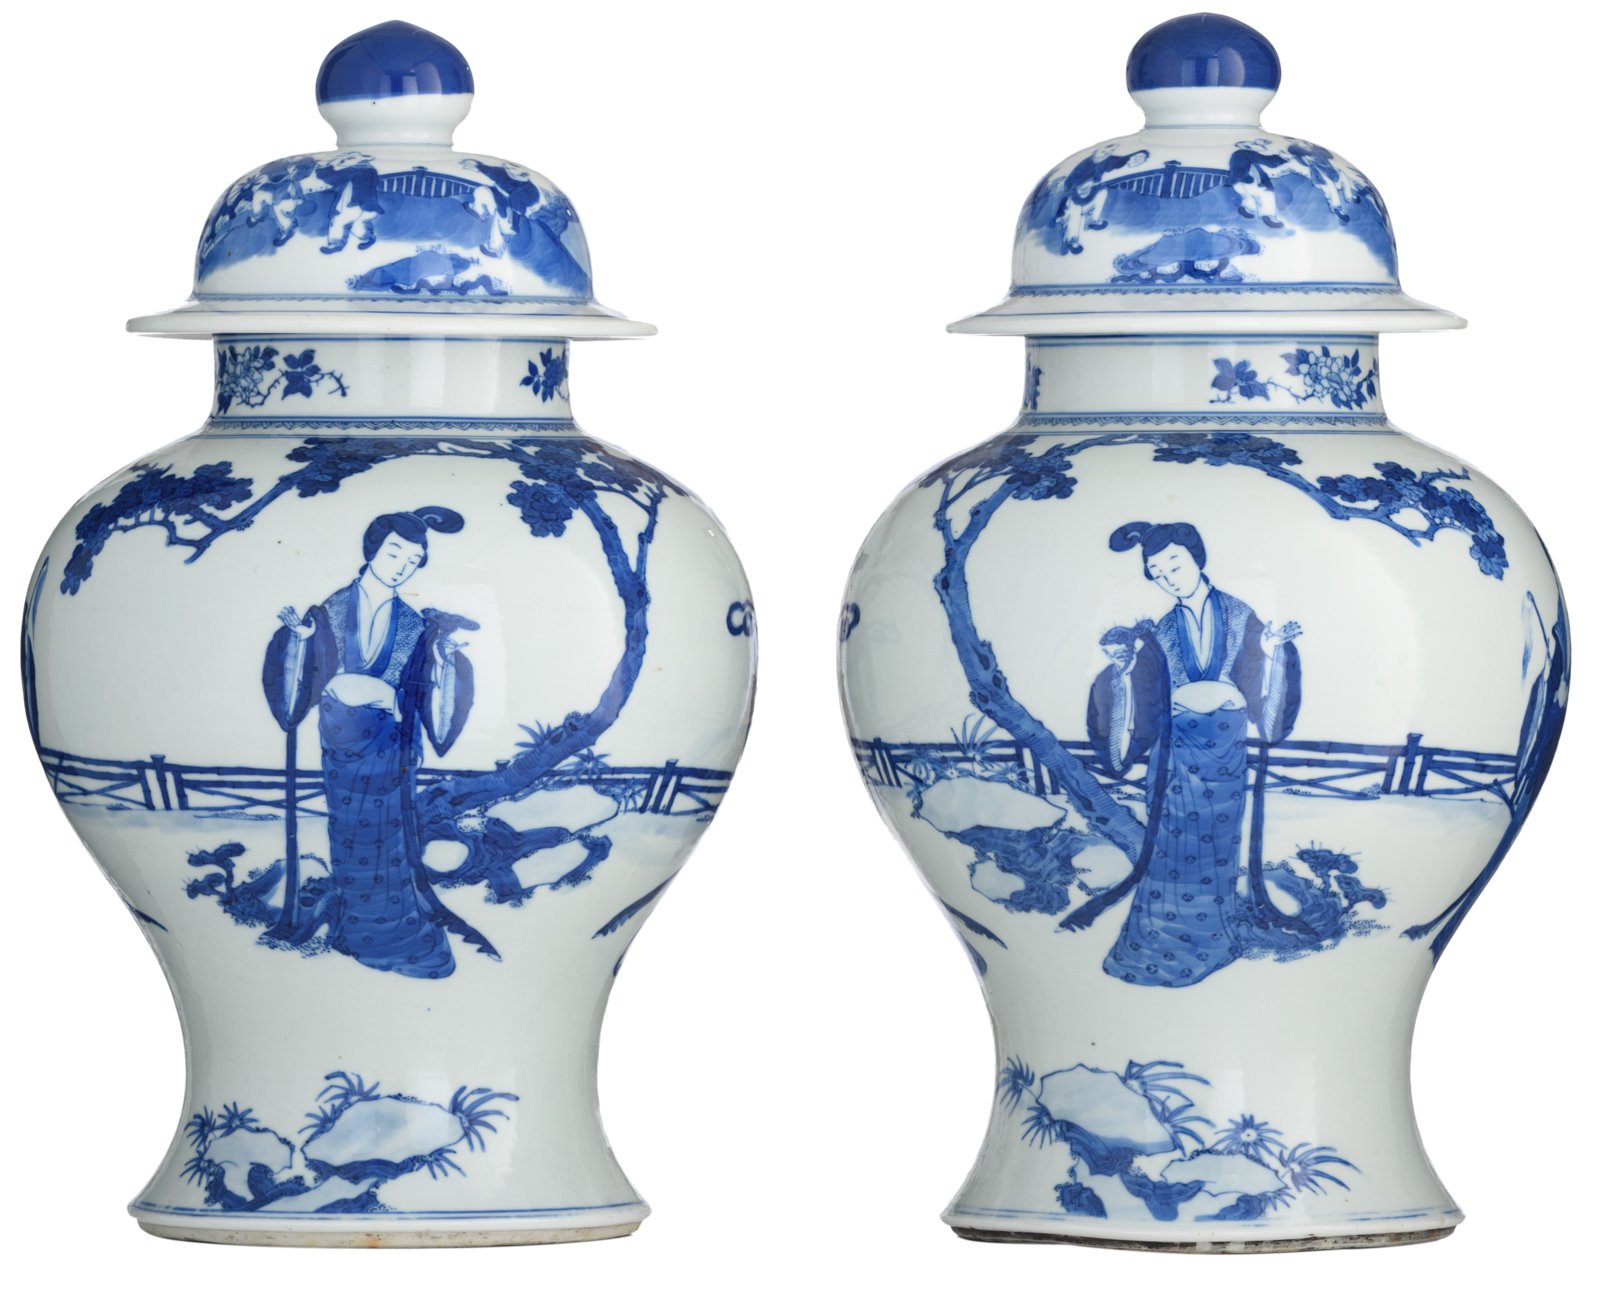 A pair of Chinese blue and white vases and covers, decorated with beauties in a garden setting, 19th